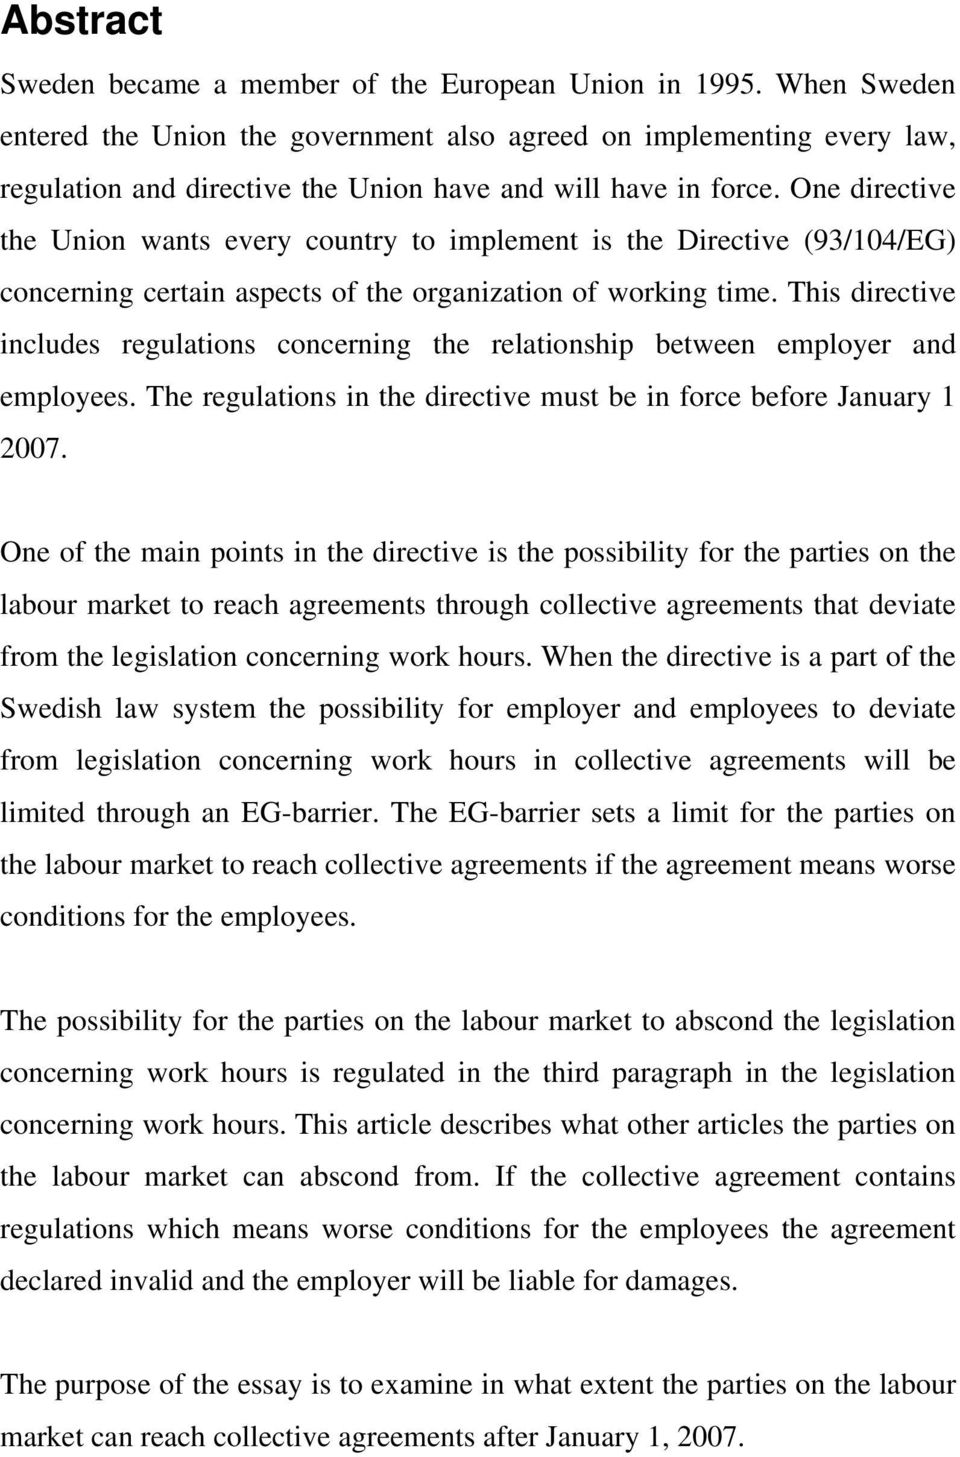 One directive the Union wants every country to implement is the Directive (93/104/EG) concerning certain aspects of the organization of working time.